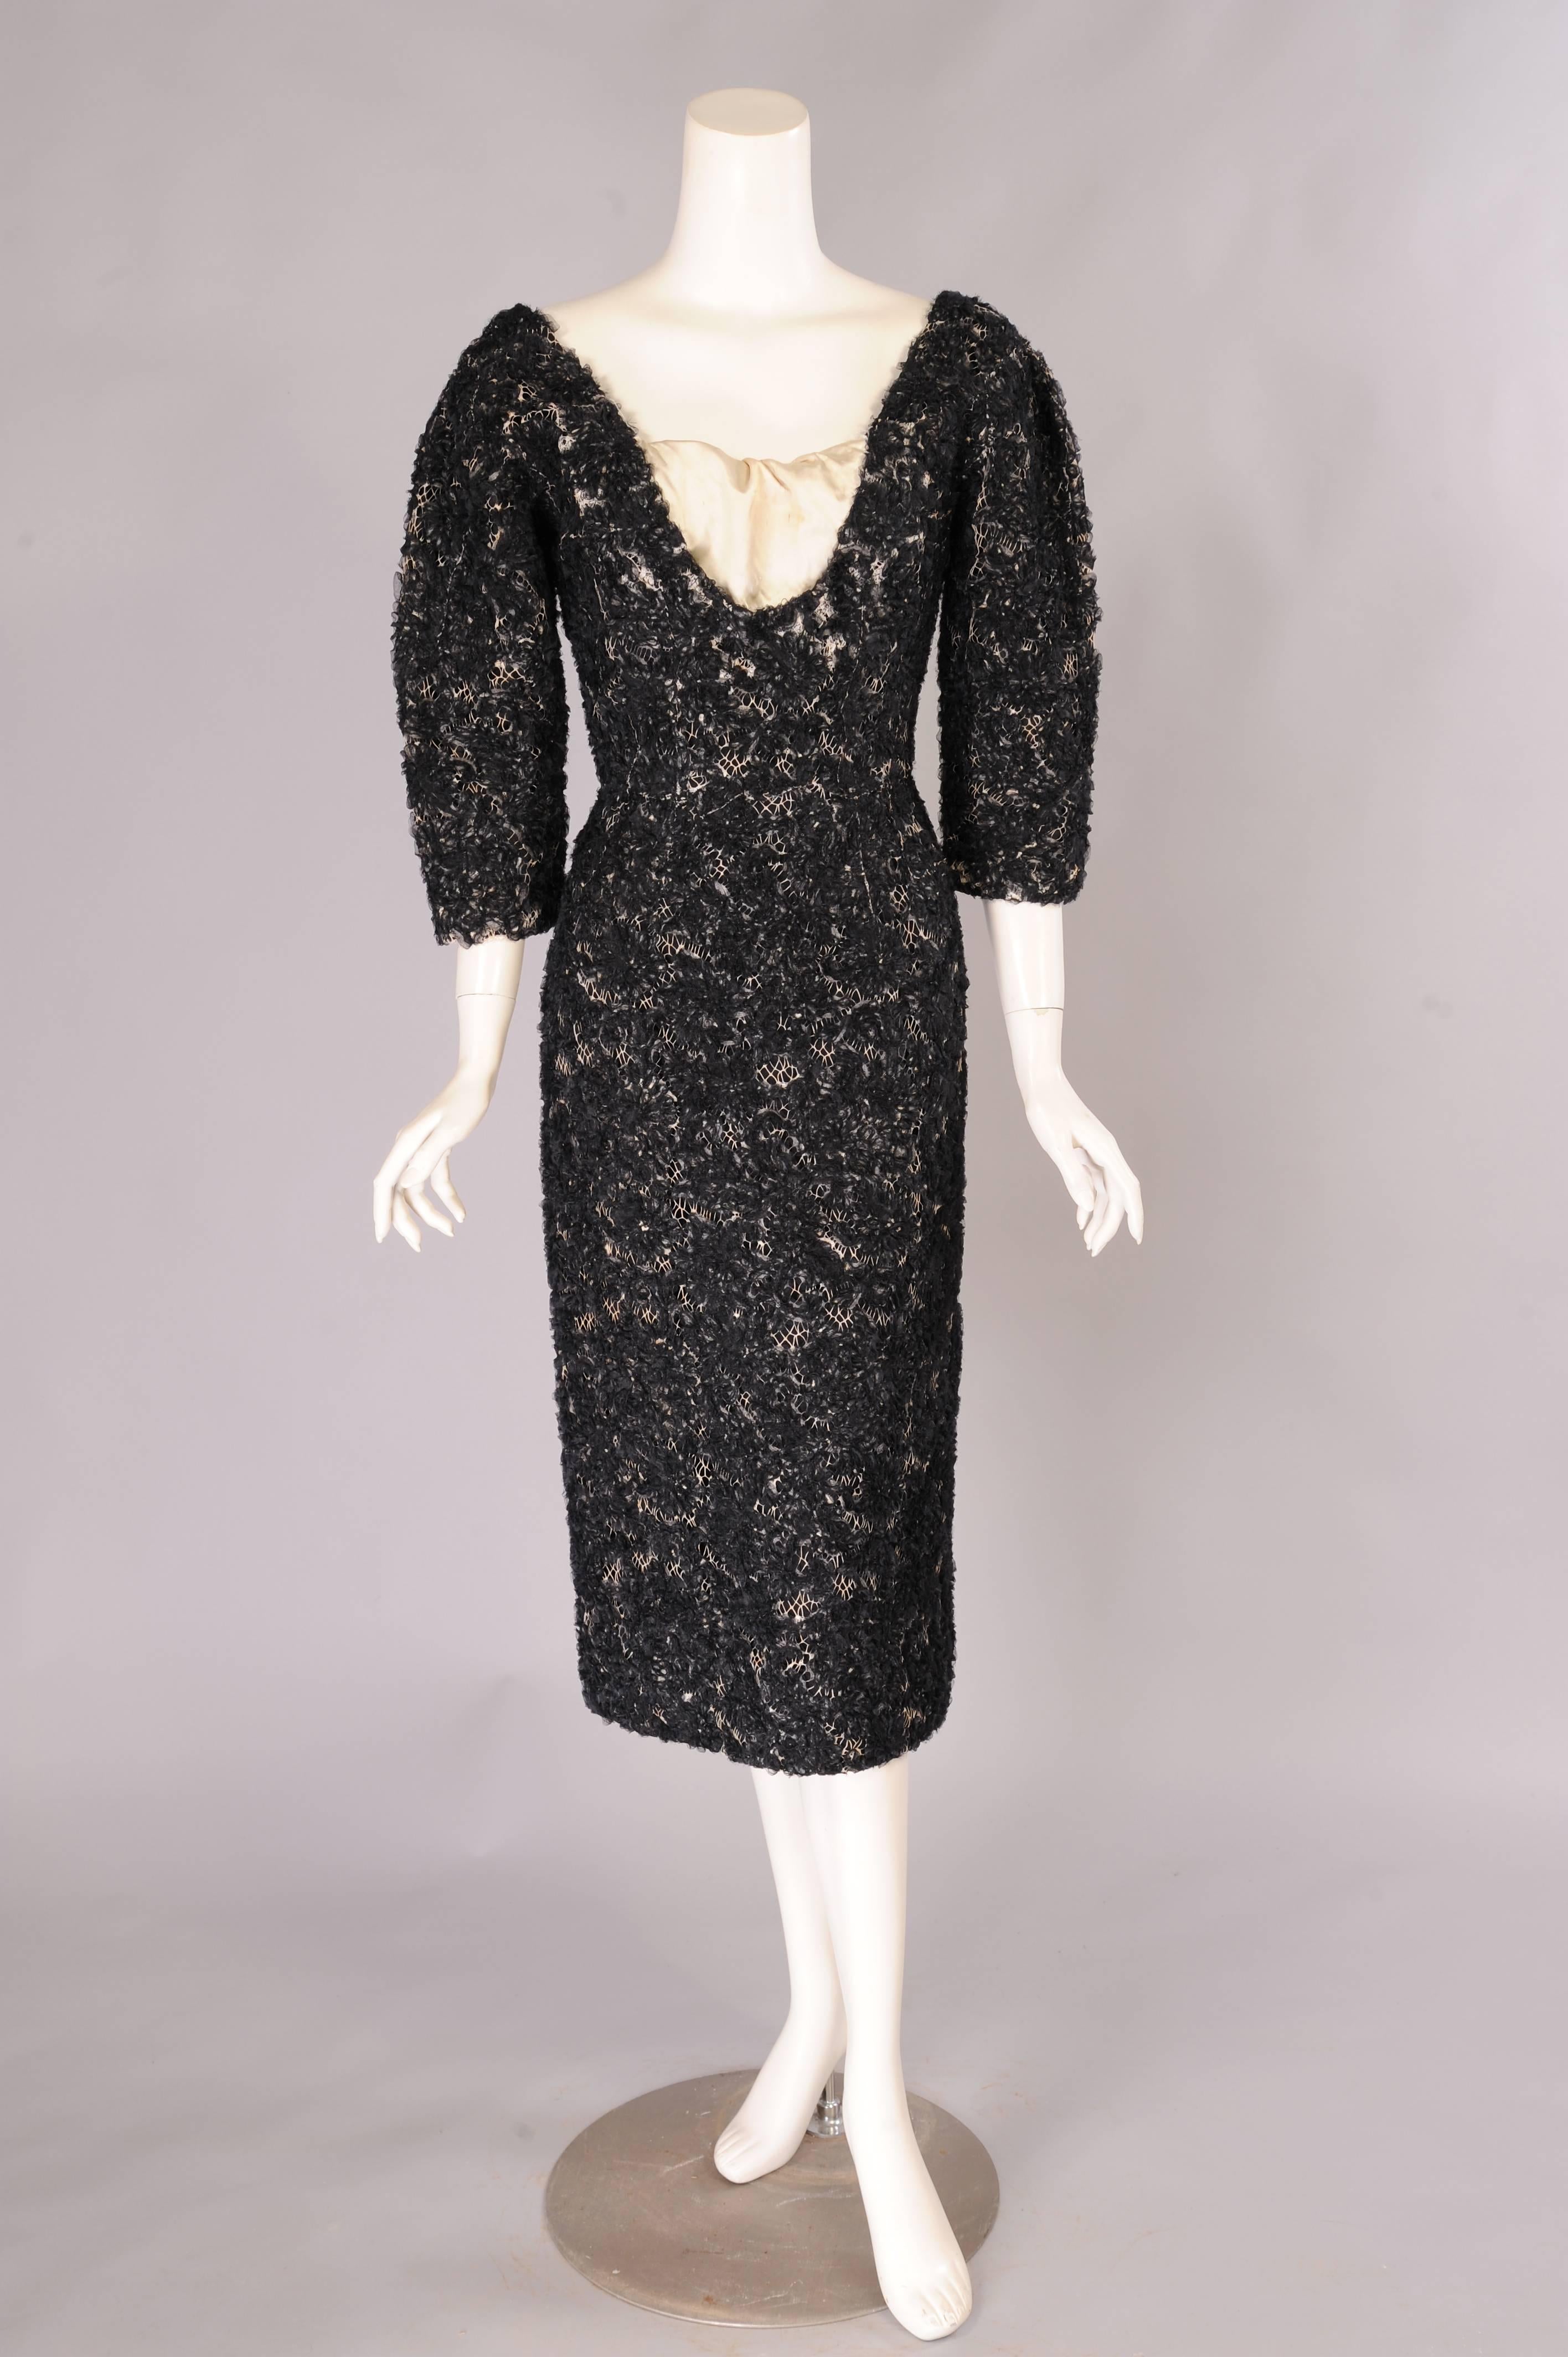 A 1950's Diorcouture dress from the estate of an American lady who fell in love with and married an Italian Count. The workmanship in this dress is just amazing. A cream colored lace dress is re-embroidered with sheer black silk ribbon creating a